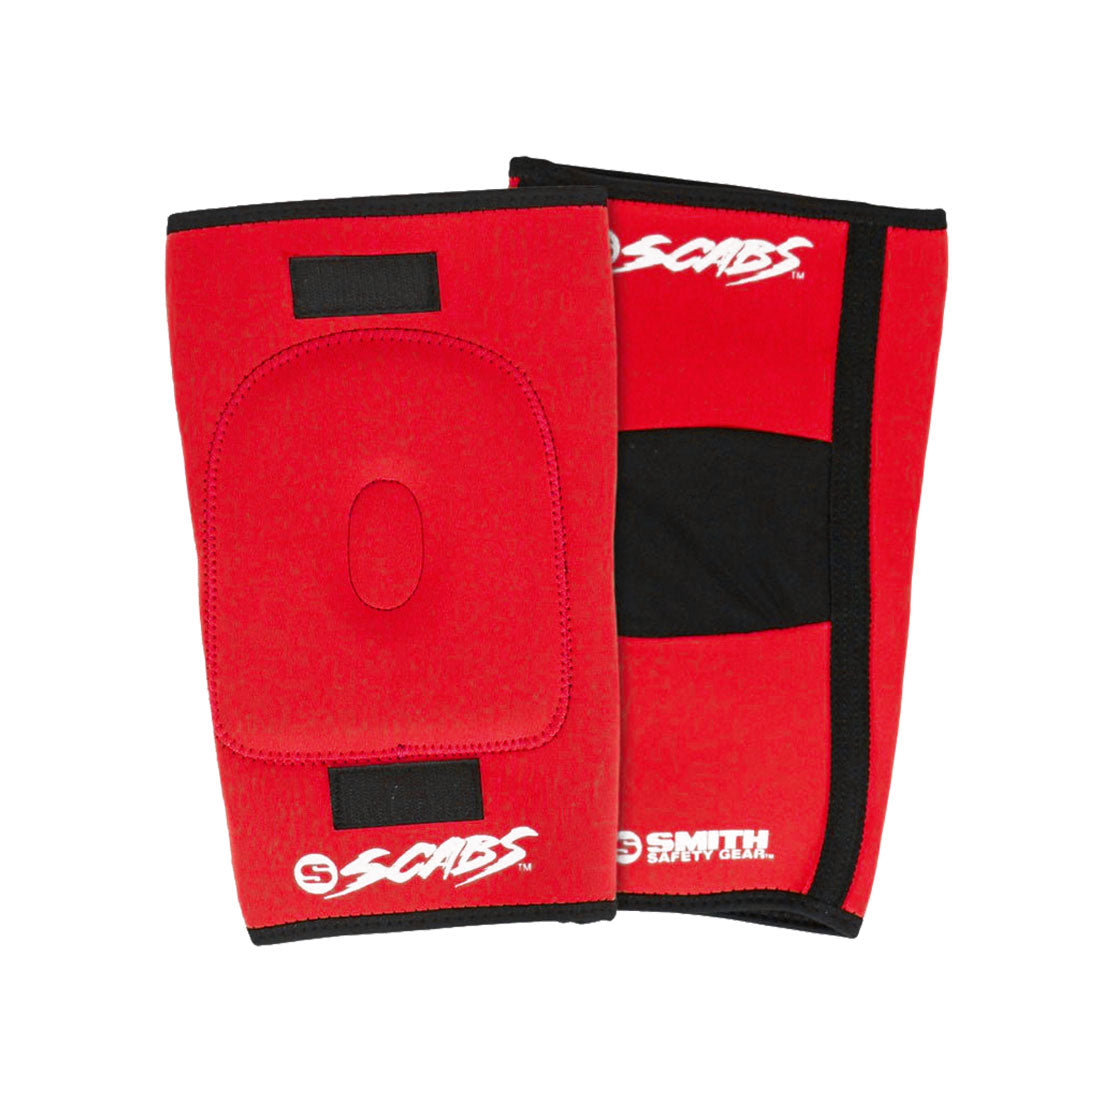 Smith Scabs Knee Gasket - Coloured Red Protective Gear